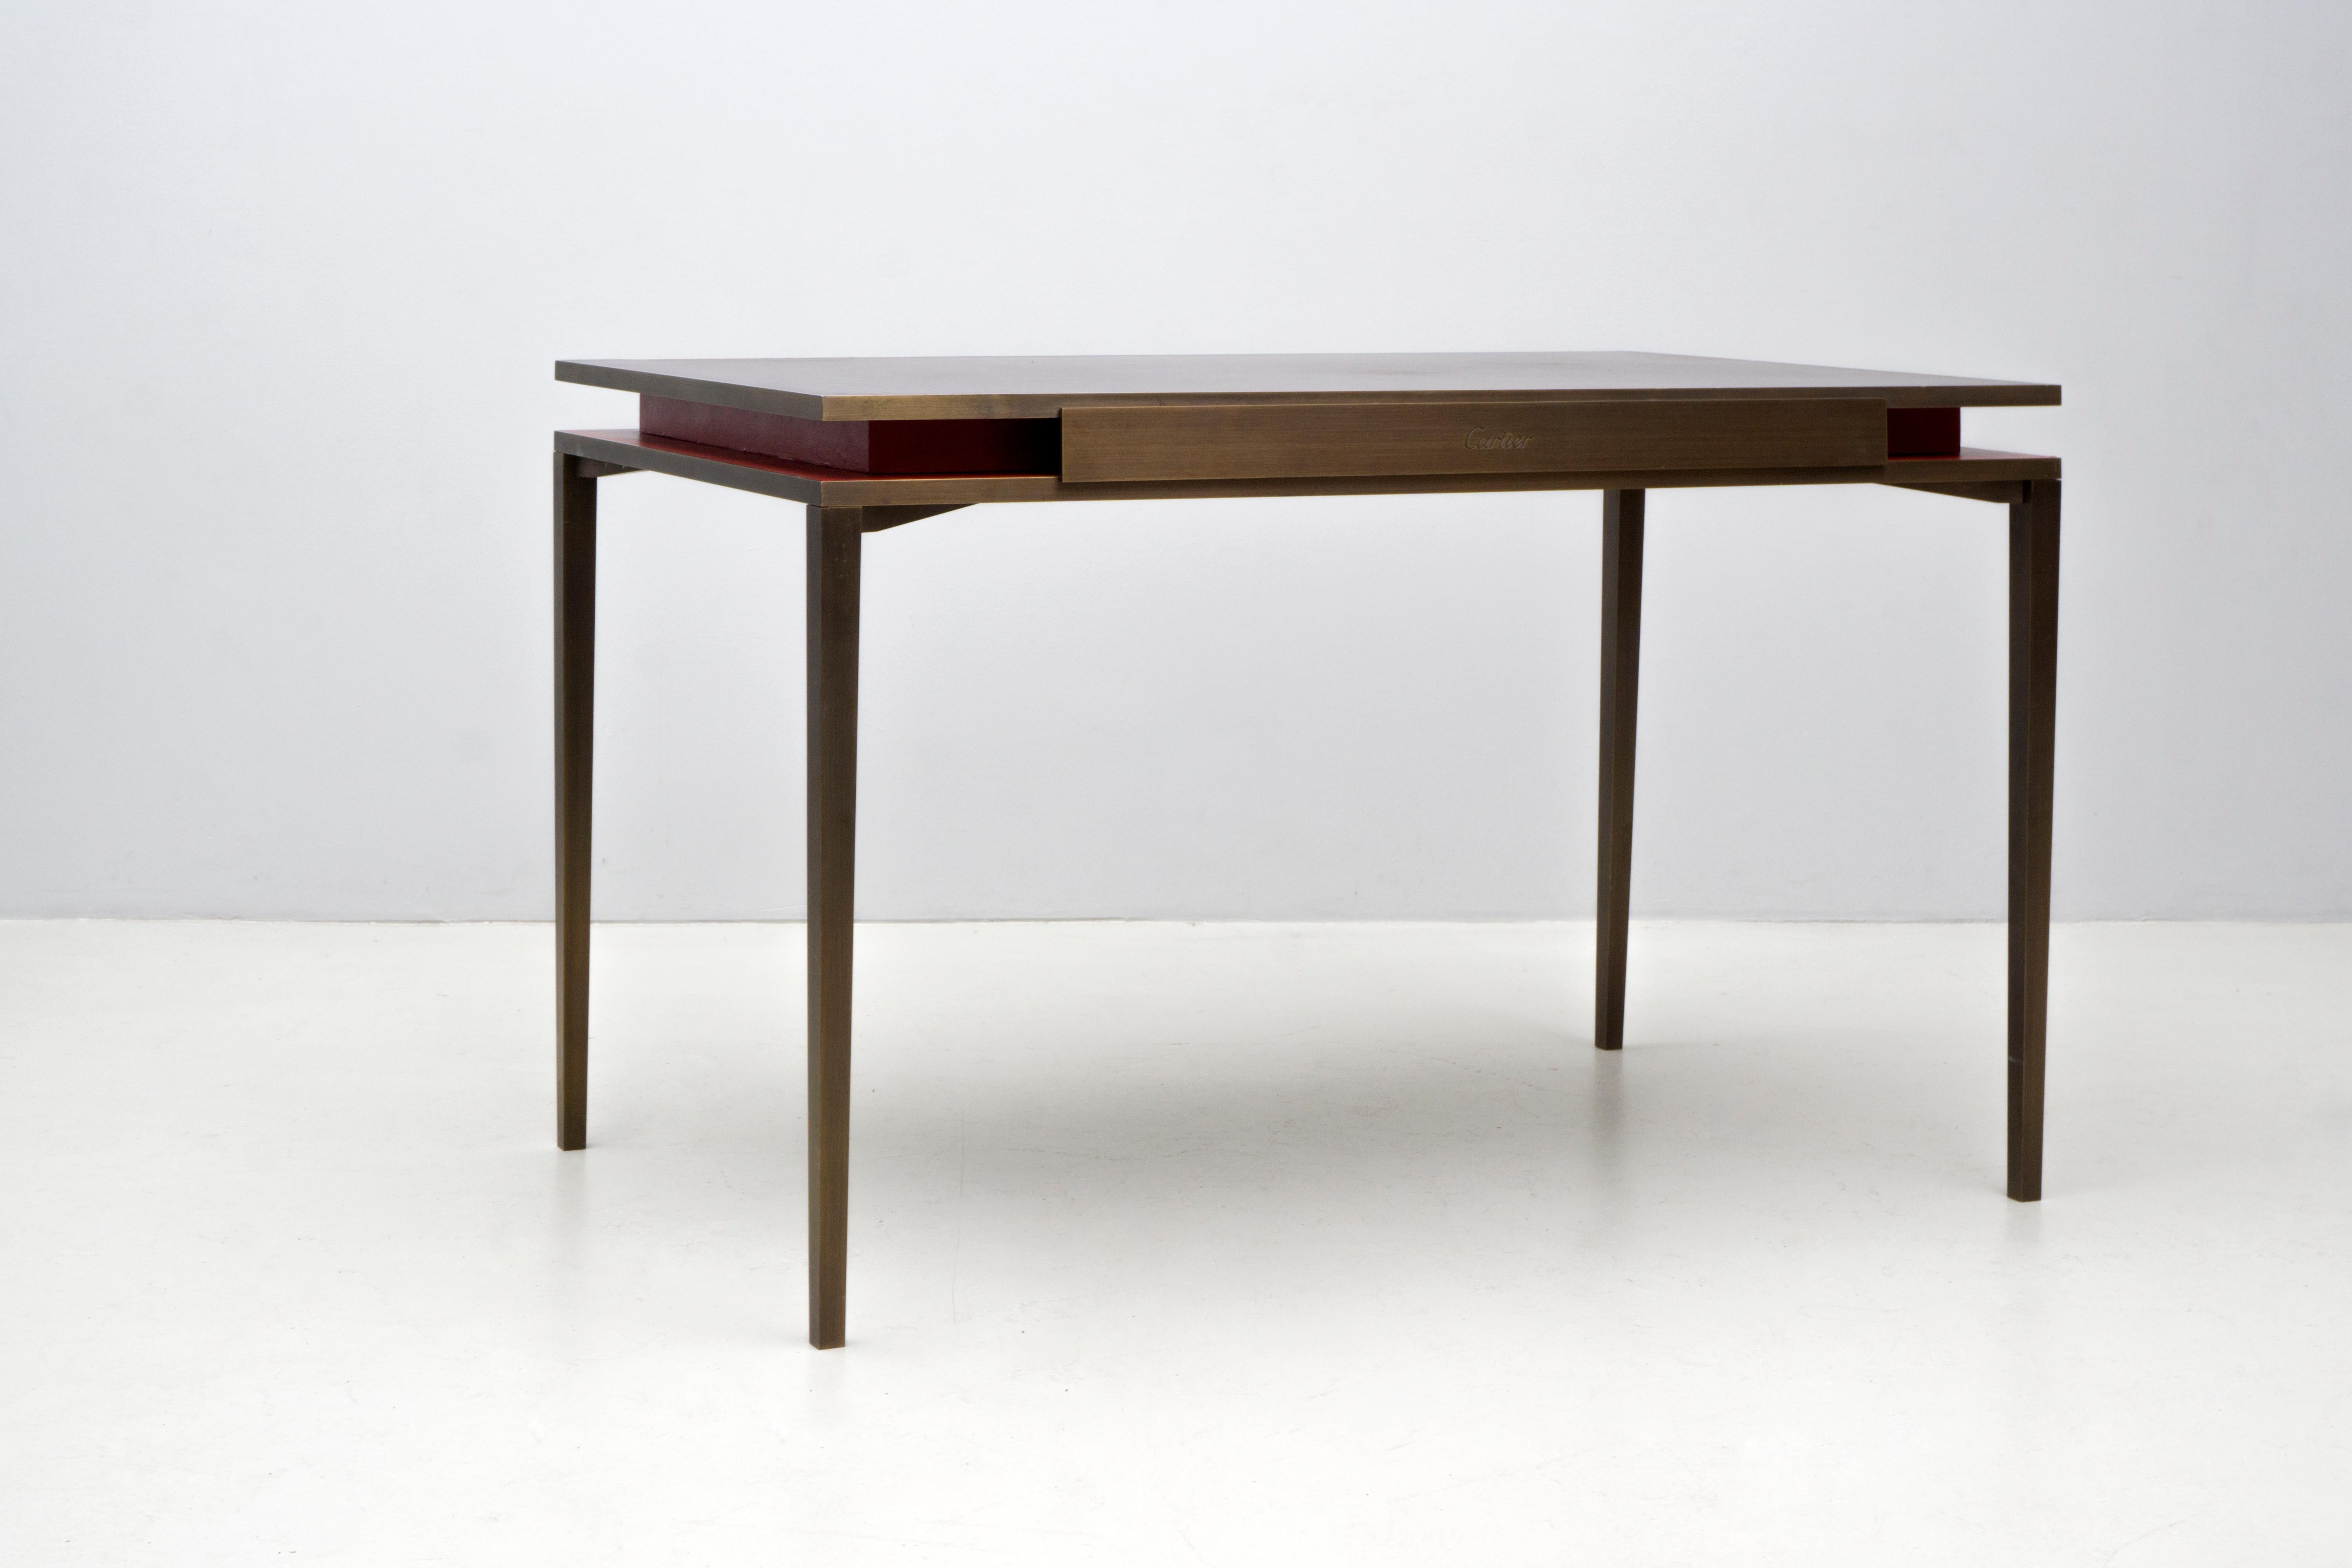 The table was manufactured by John Desmond LTD UK for the french luxury company Cartier Paris. It consists of two levels, the bottom one being covered in red leather and the top one in aubergine-colored leather. The table itself is made of